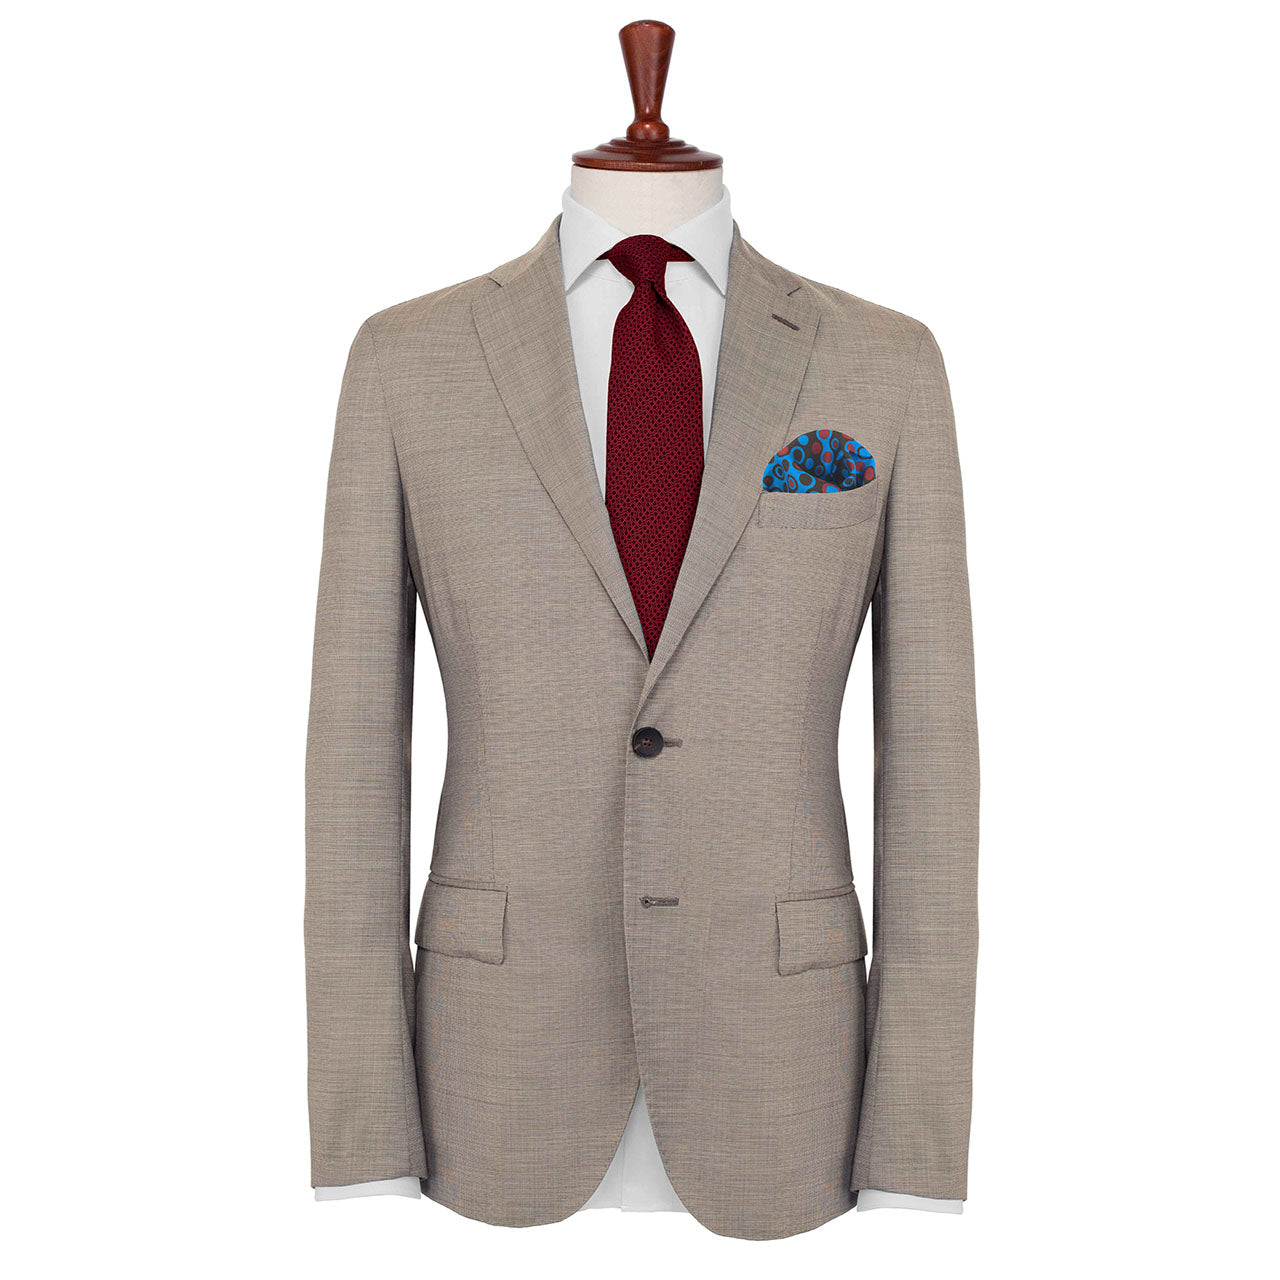 The Code Deep Brown Pocket Square